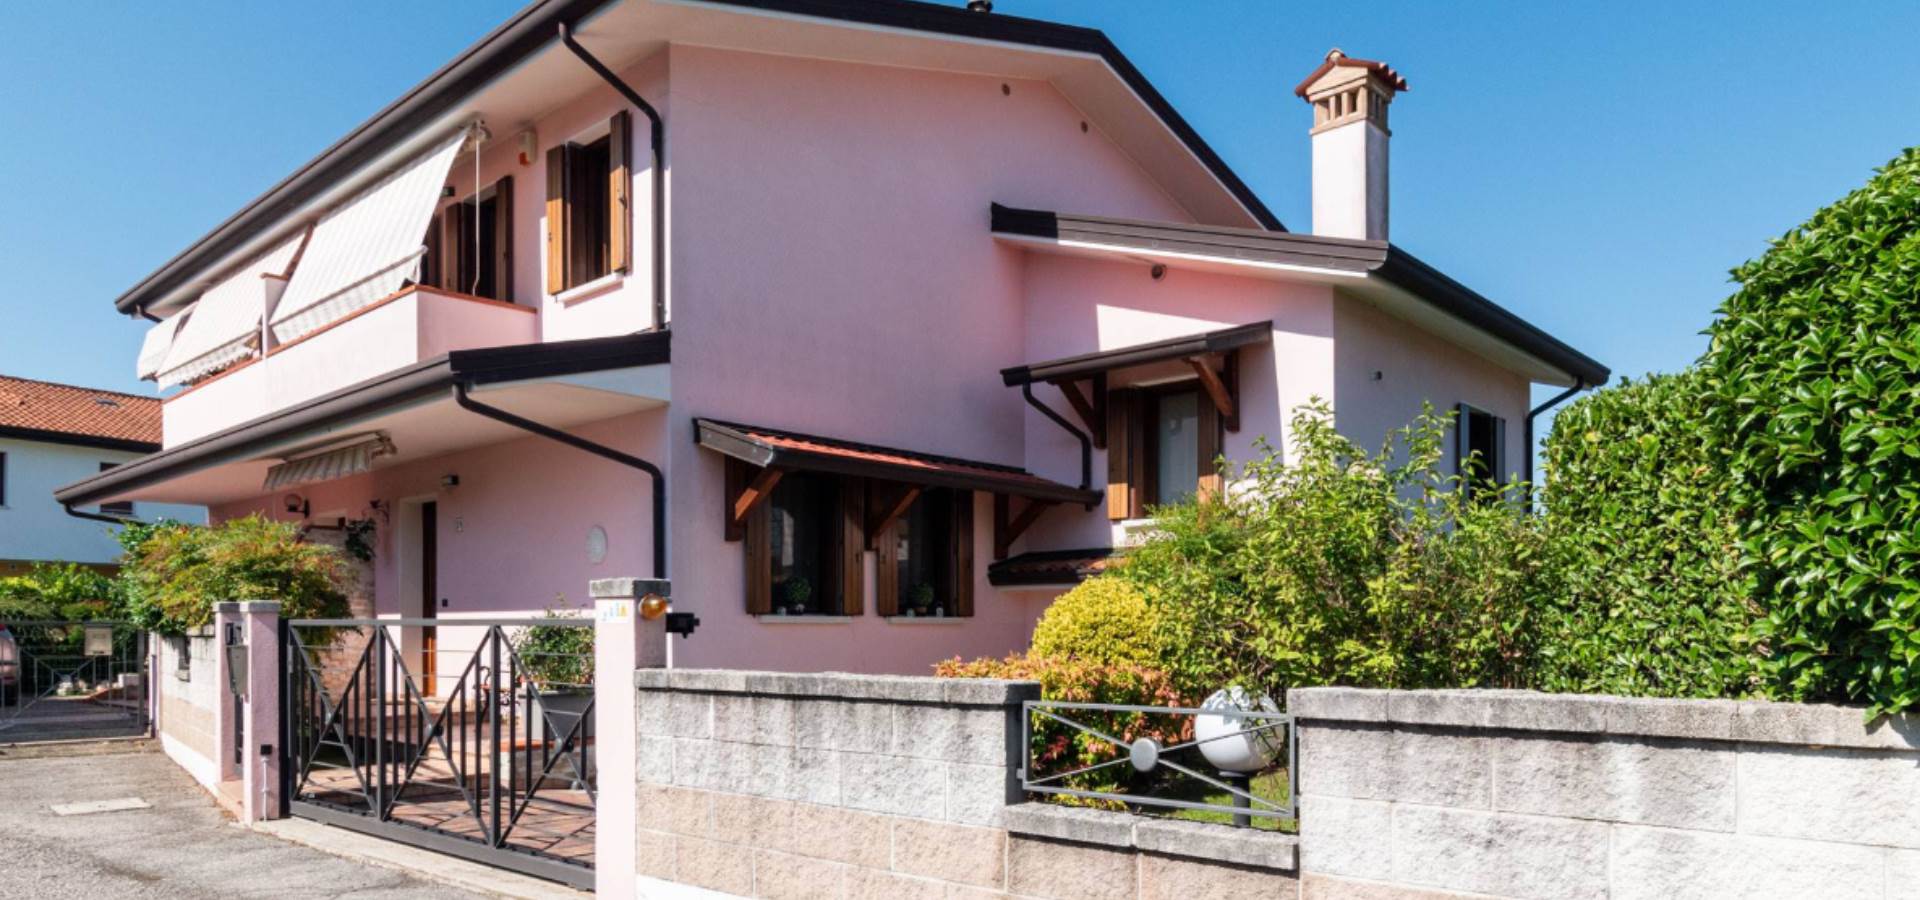 PORTOGRUARO, Duplex villa for sale of 135 Sq. mt., Excellent Condition, Heating Individual heating system, Energetic class: D, placed at Raised, composed by: 7 Rooms, Show cooking, , 3 Bedrooms, 2 